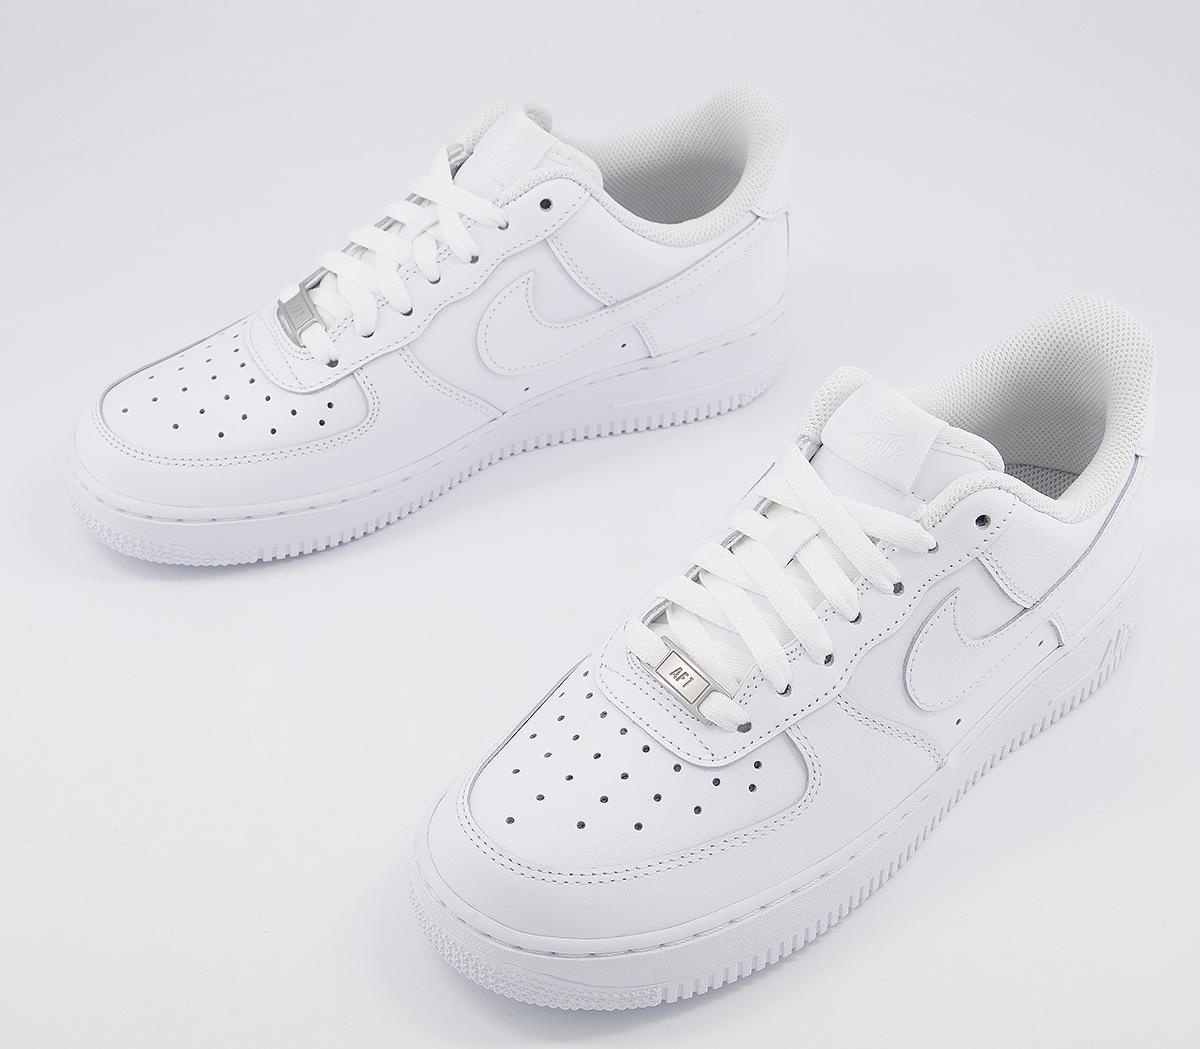 Nike Air Force 1 Trainers White - His trainers